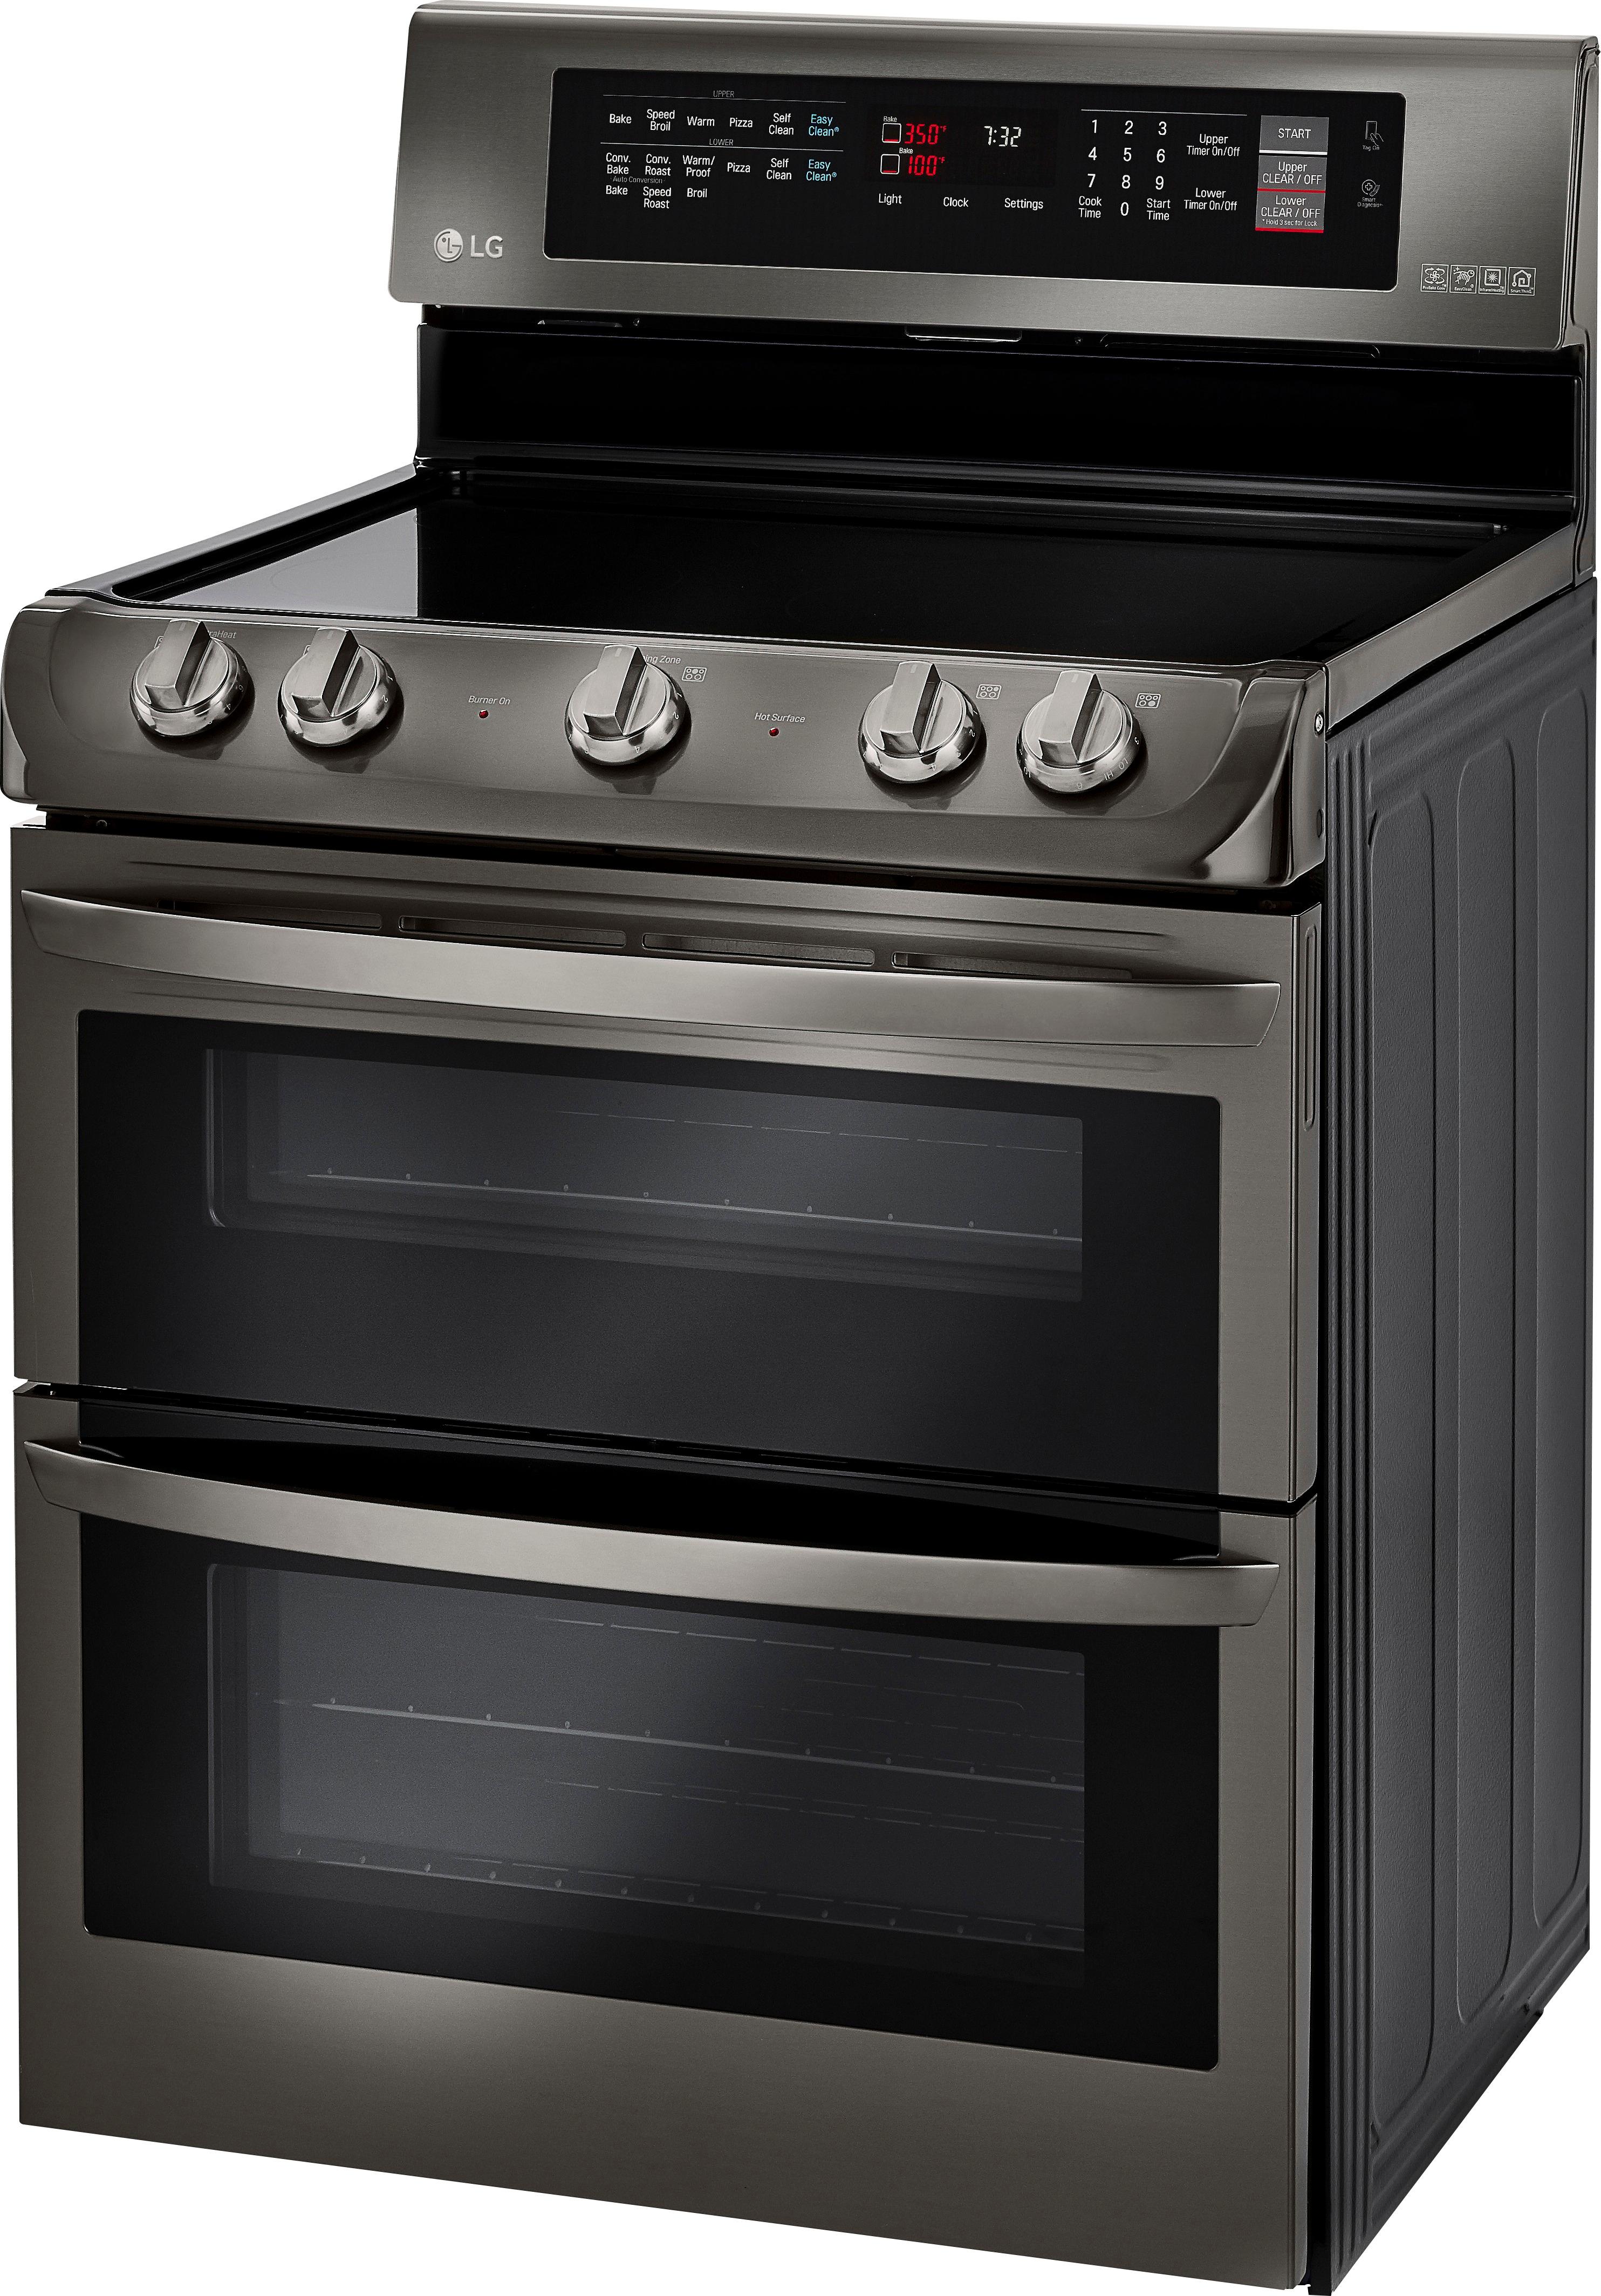 LG 7.3 Cu. Ft. Self-Cleaning Freestanding Double Oven Electric Range Black Stainless Steel Electric Stove